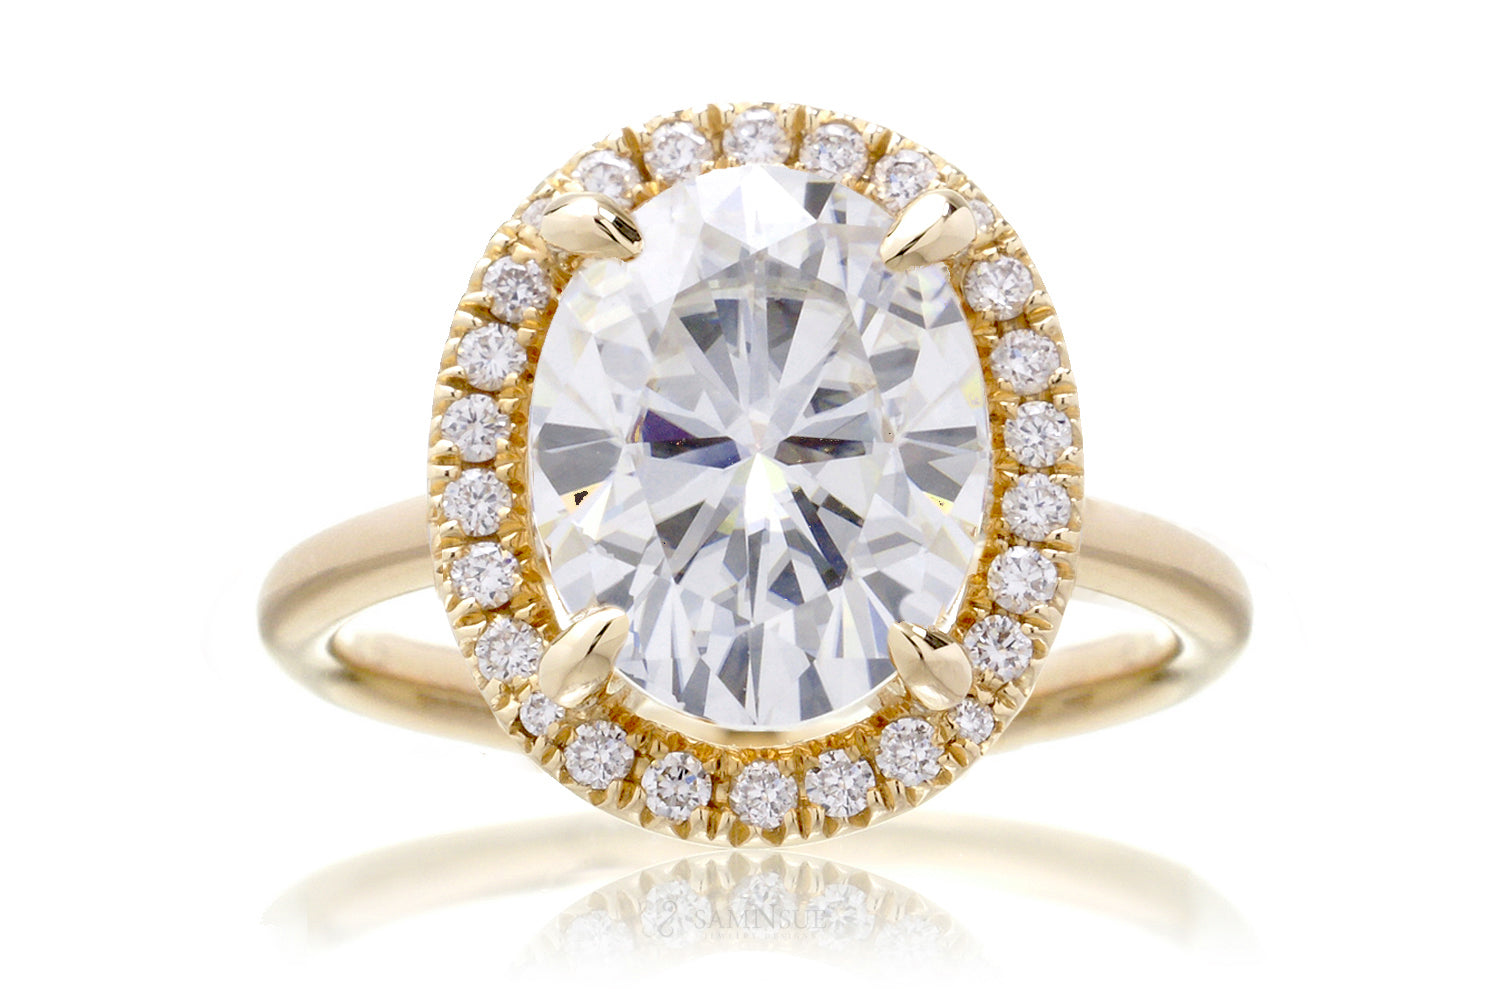 The Drenched Oval Moissanite Ring